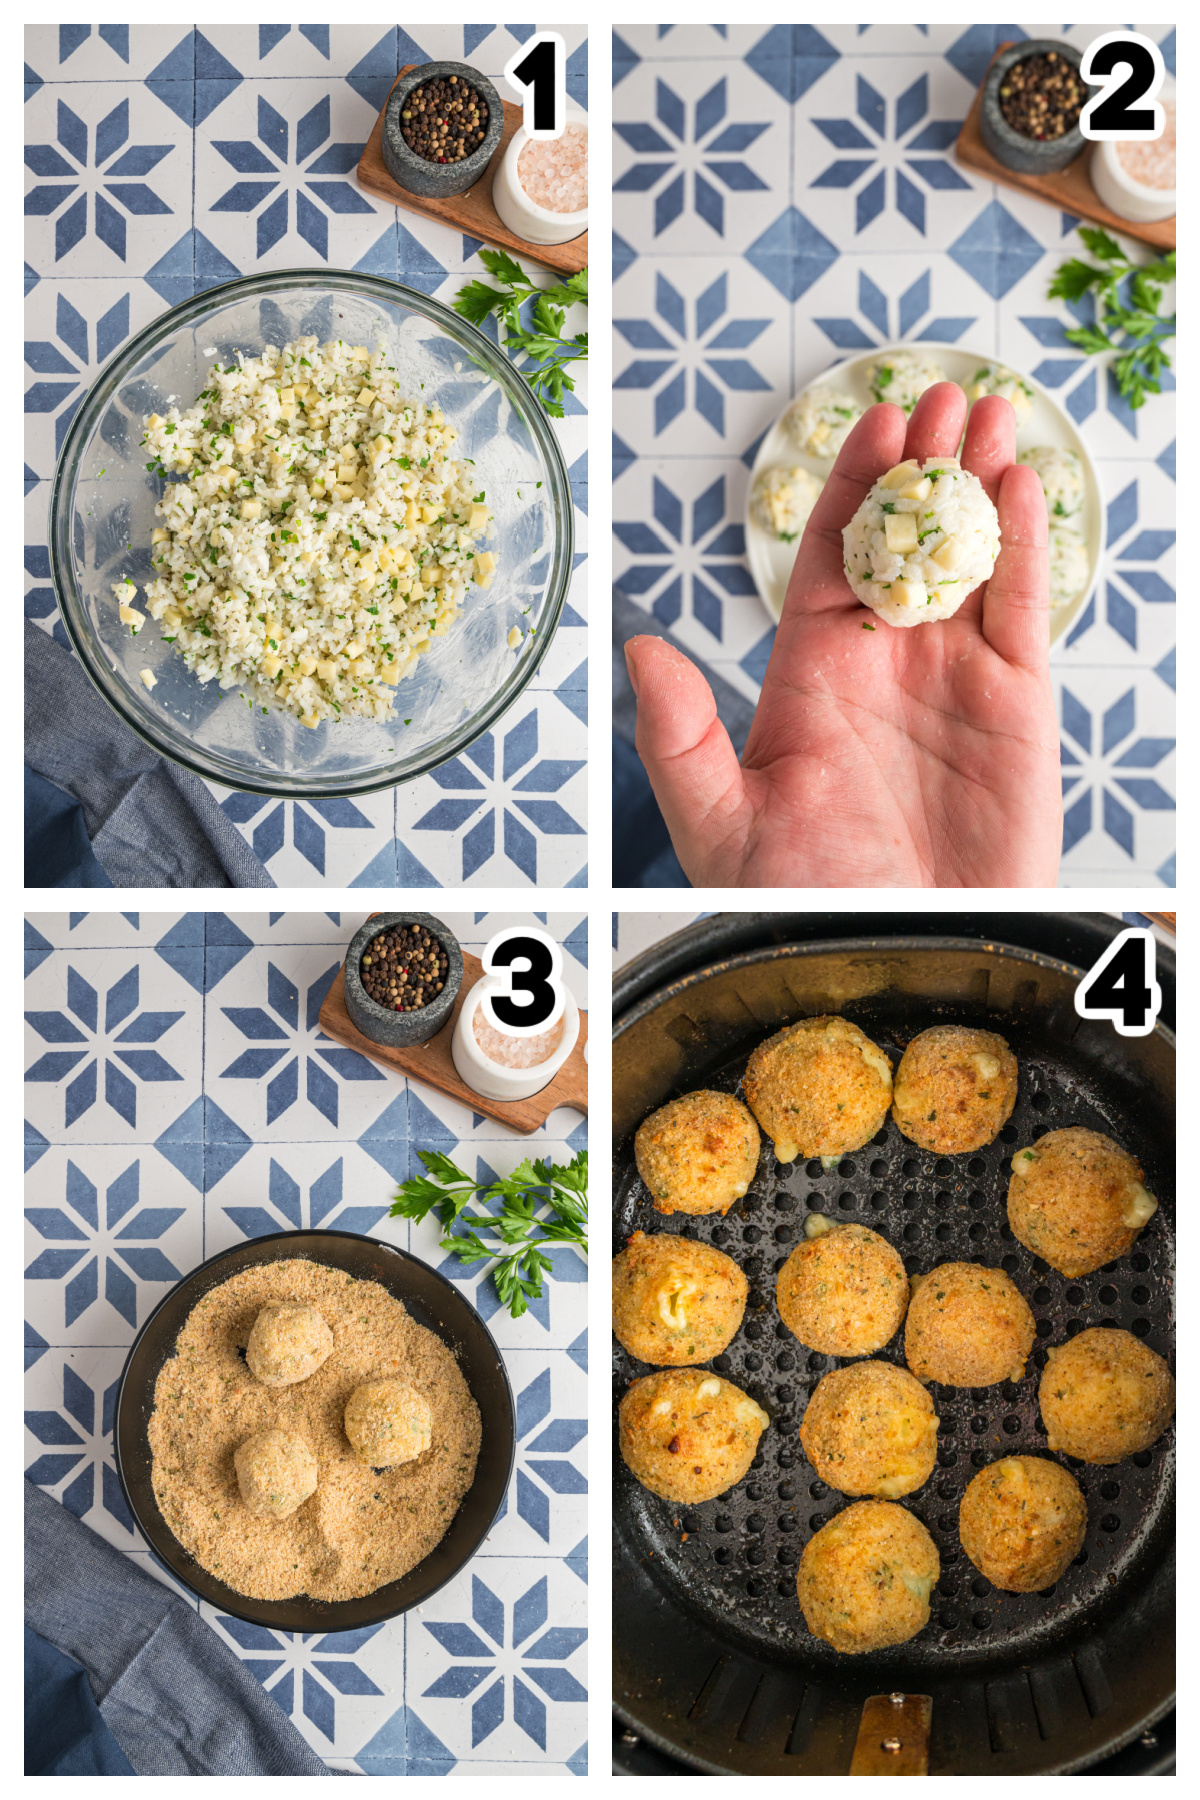 Collage of the steps of rolling and coating arancini balls.